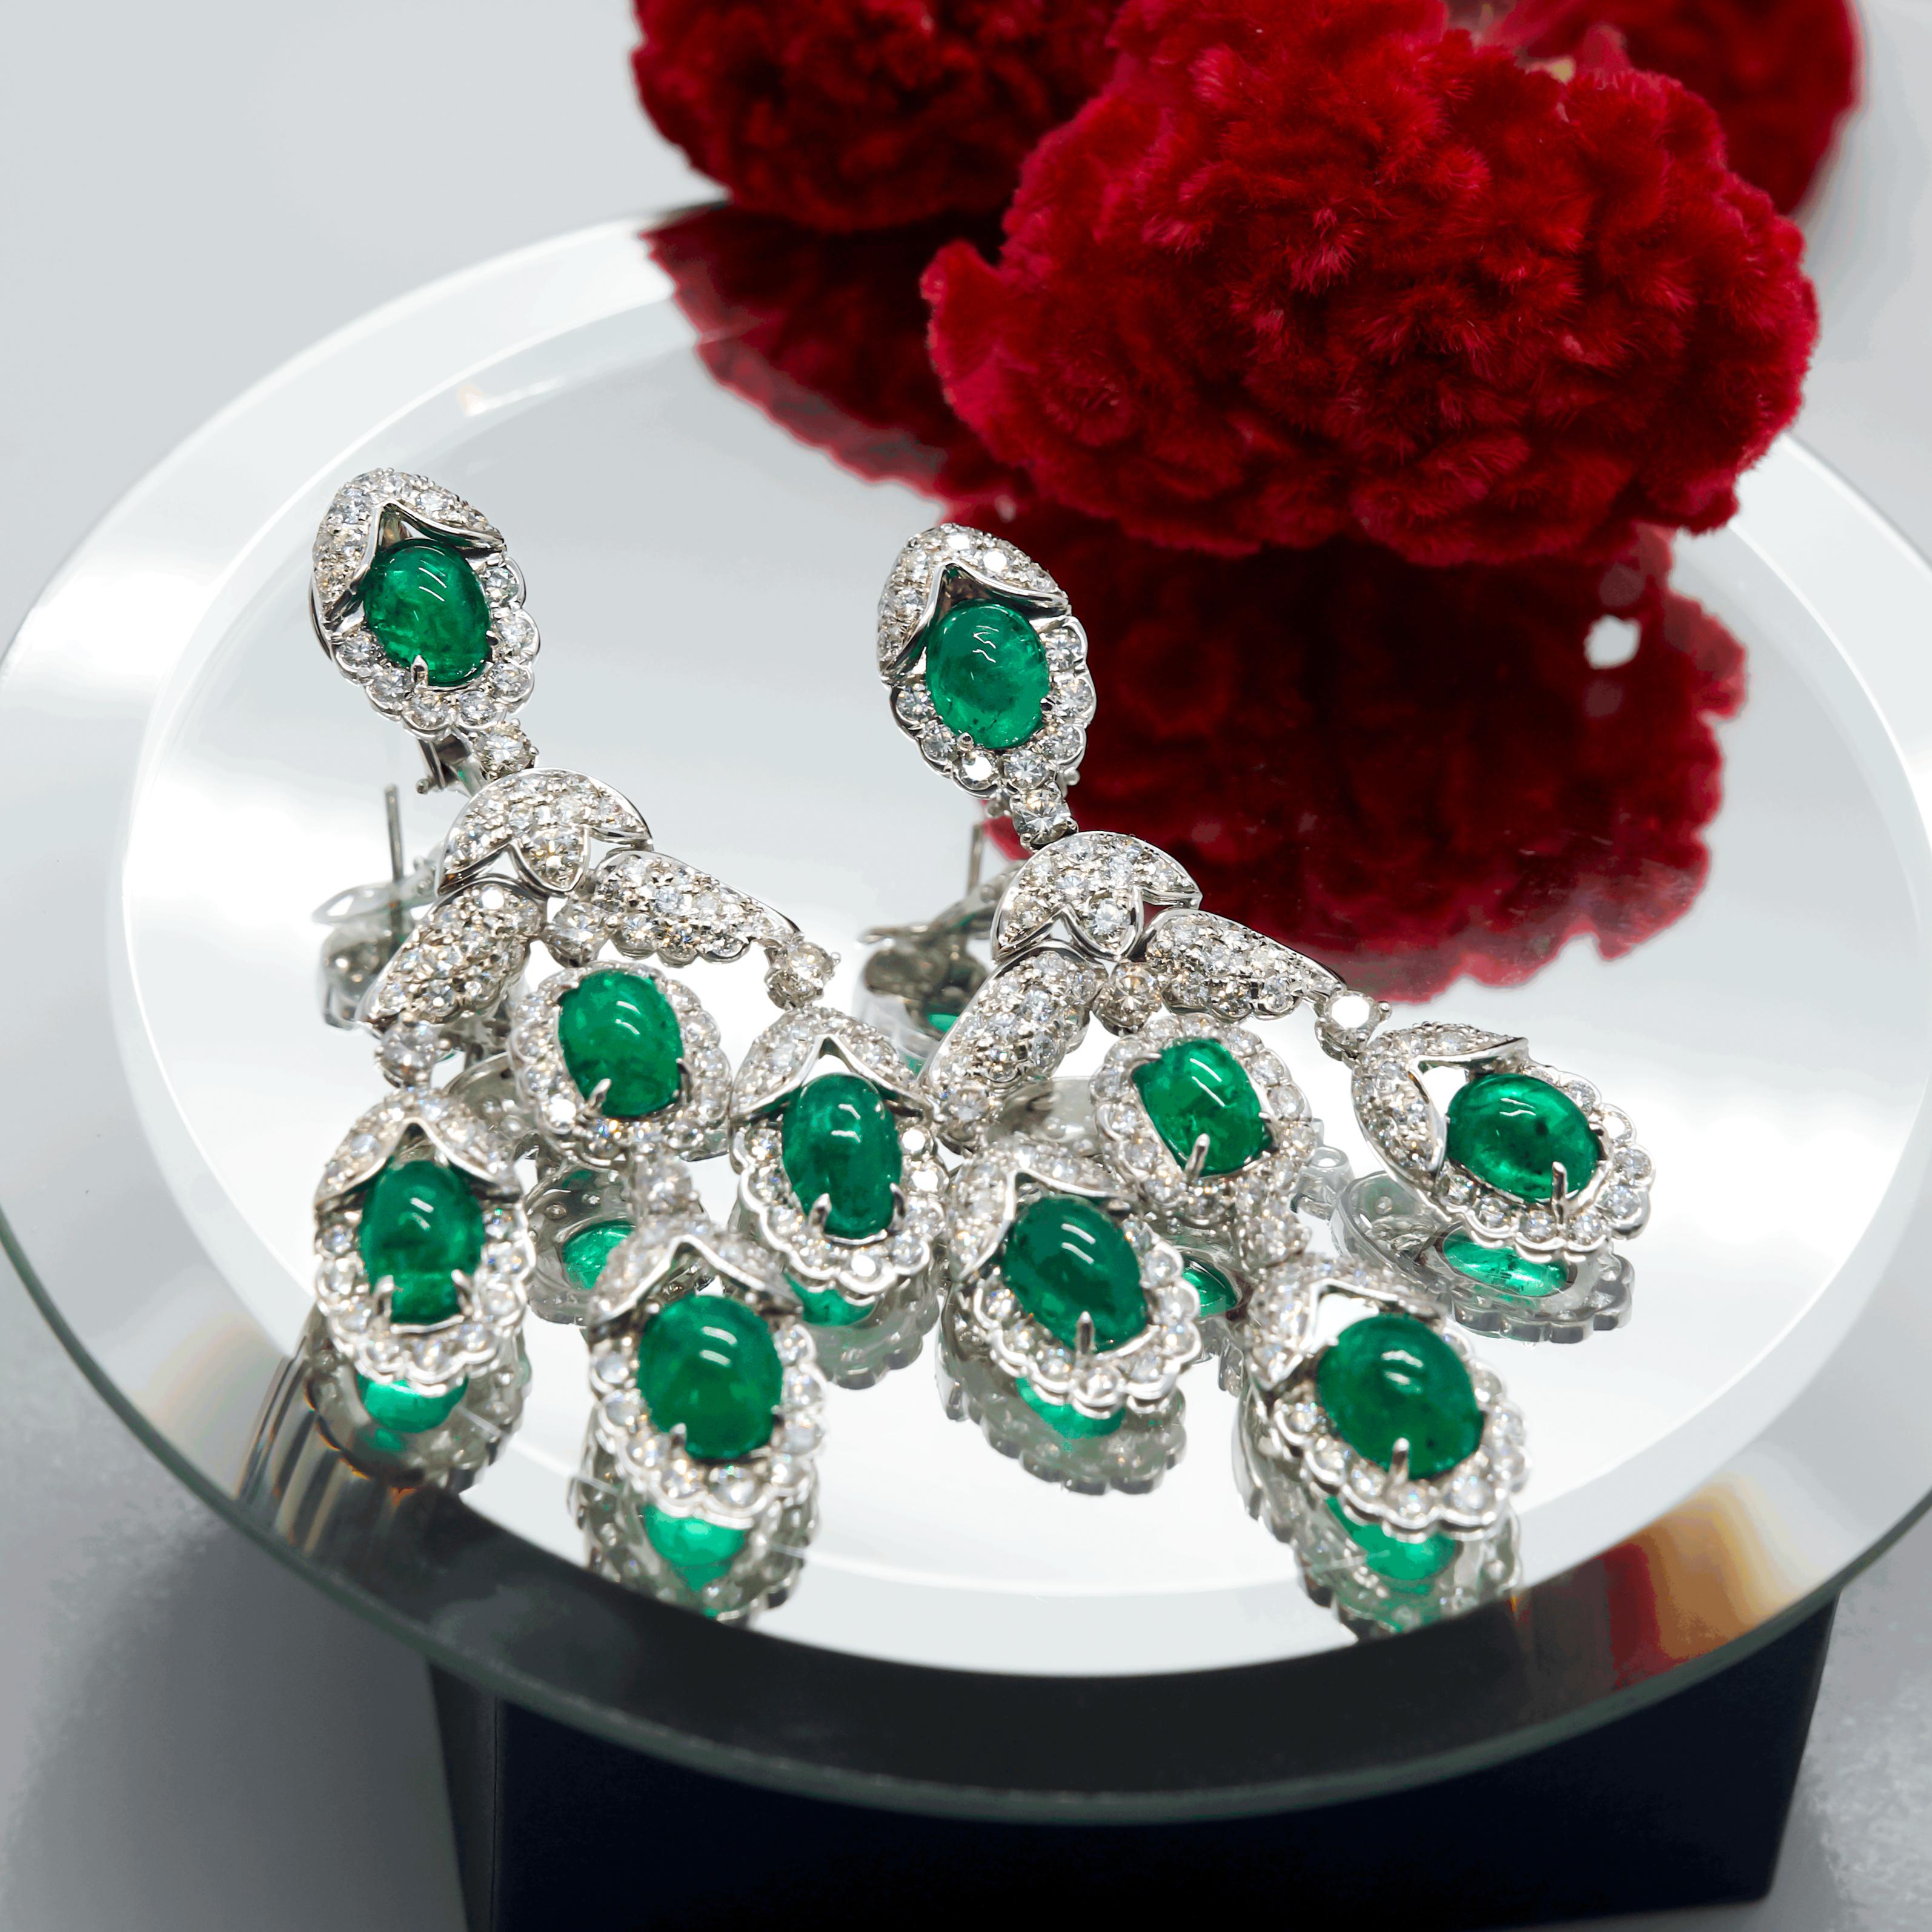 Andreoli Emerald Cabochon Diamond Chandelier Earrings 18 Karat White Gold In New Condition For Sale In New York, NY